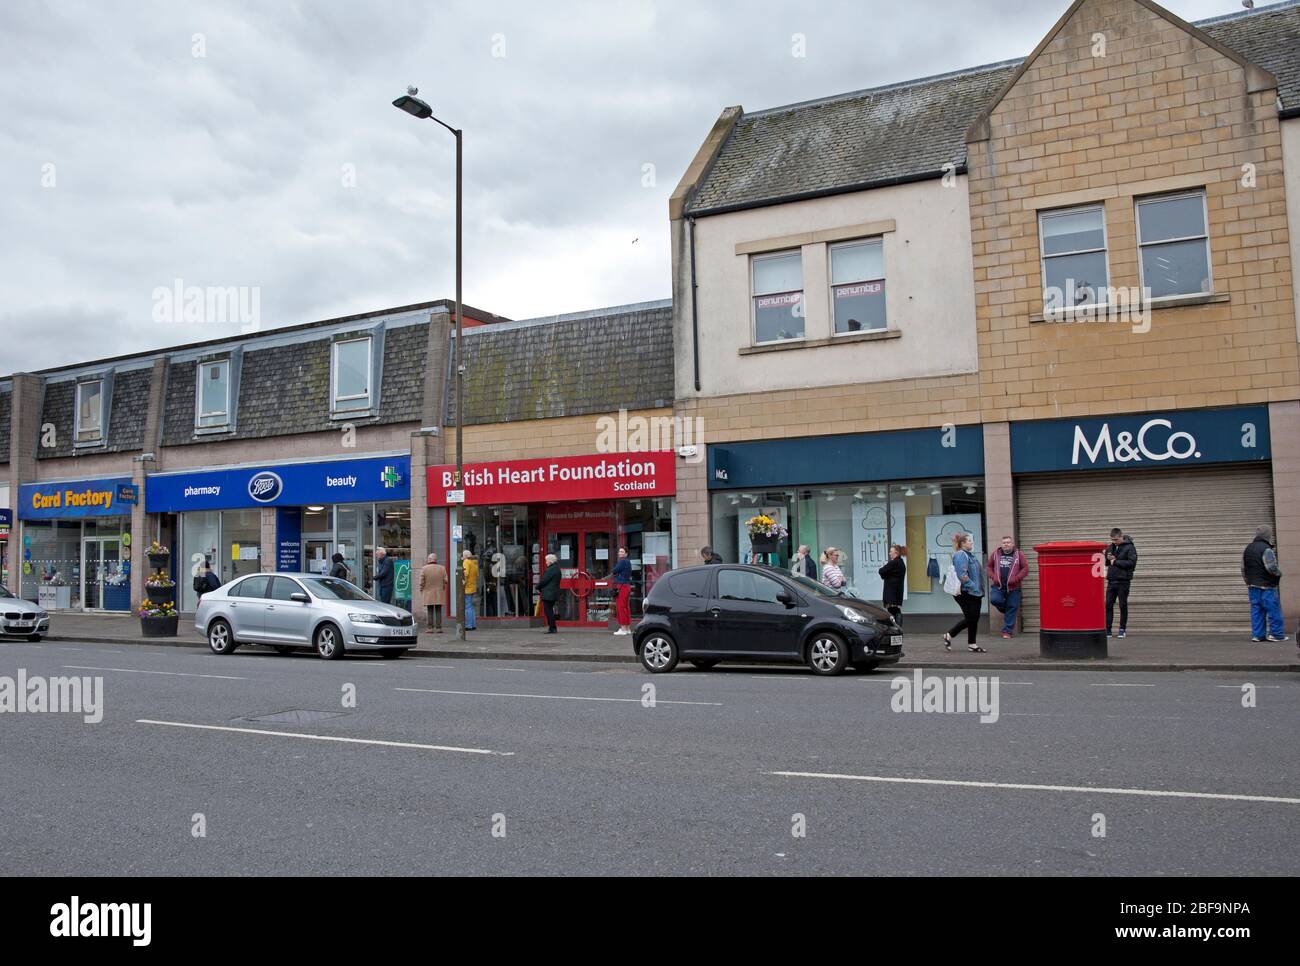 Musselburgh, High Street, East Lothian, Scotland, UK. Very quiet pavements due to the Coronavirus Lockdown but several cars passing through. The busiest area for pedestrians was outside Boots Pharmacy, (The Chemist) Pictured, where people were social distancing in the queue. Stock Photo